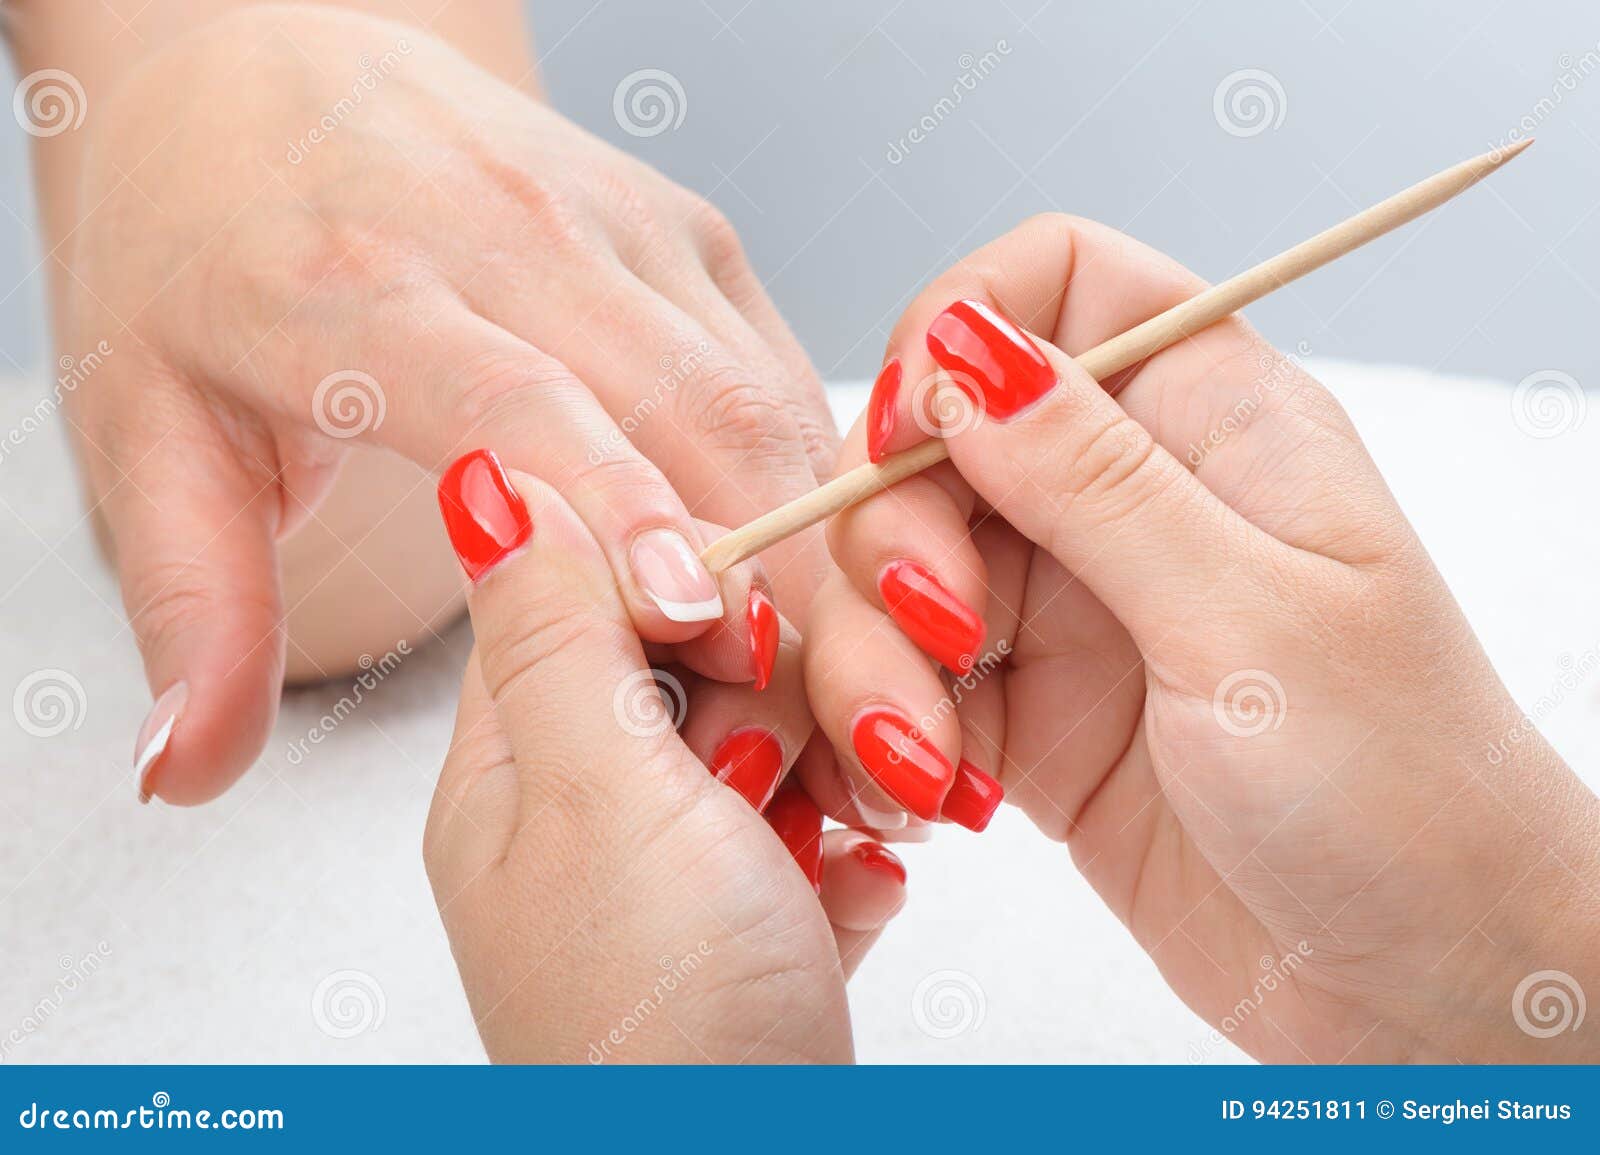 cuticles care with cuticle pusher